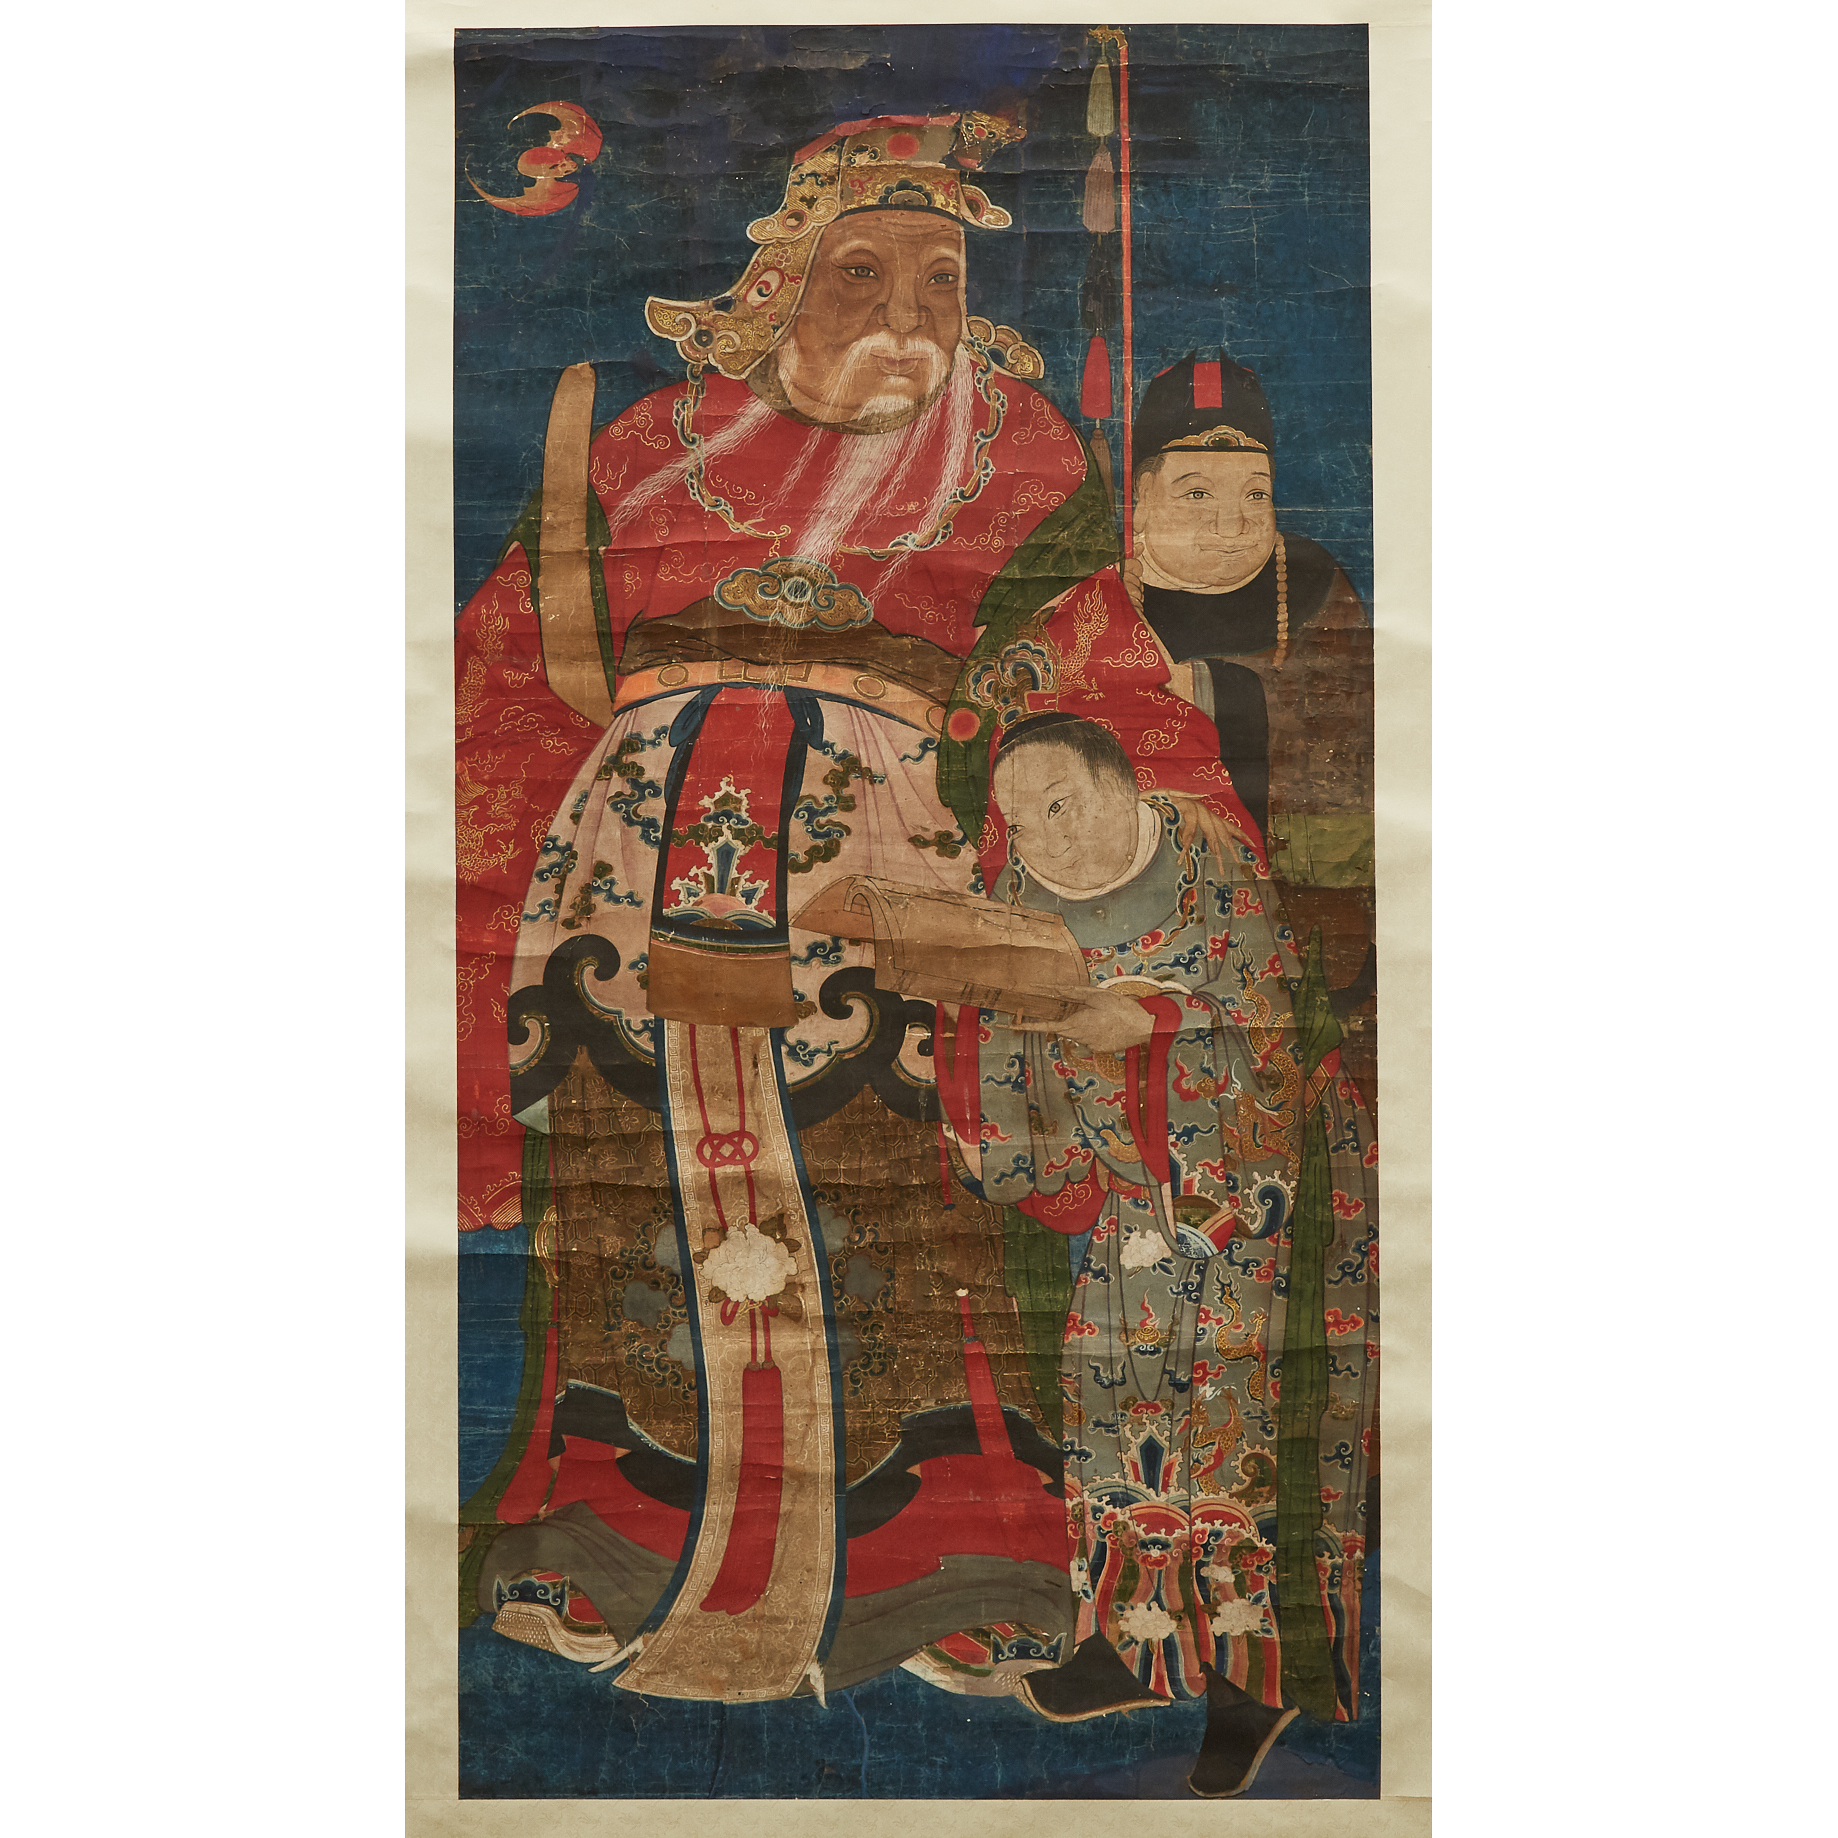 A Portrait of the Prosperity God Lu and Attendants, 18th/19th Century